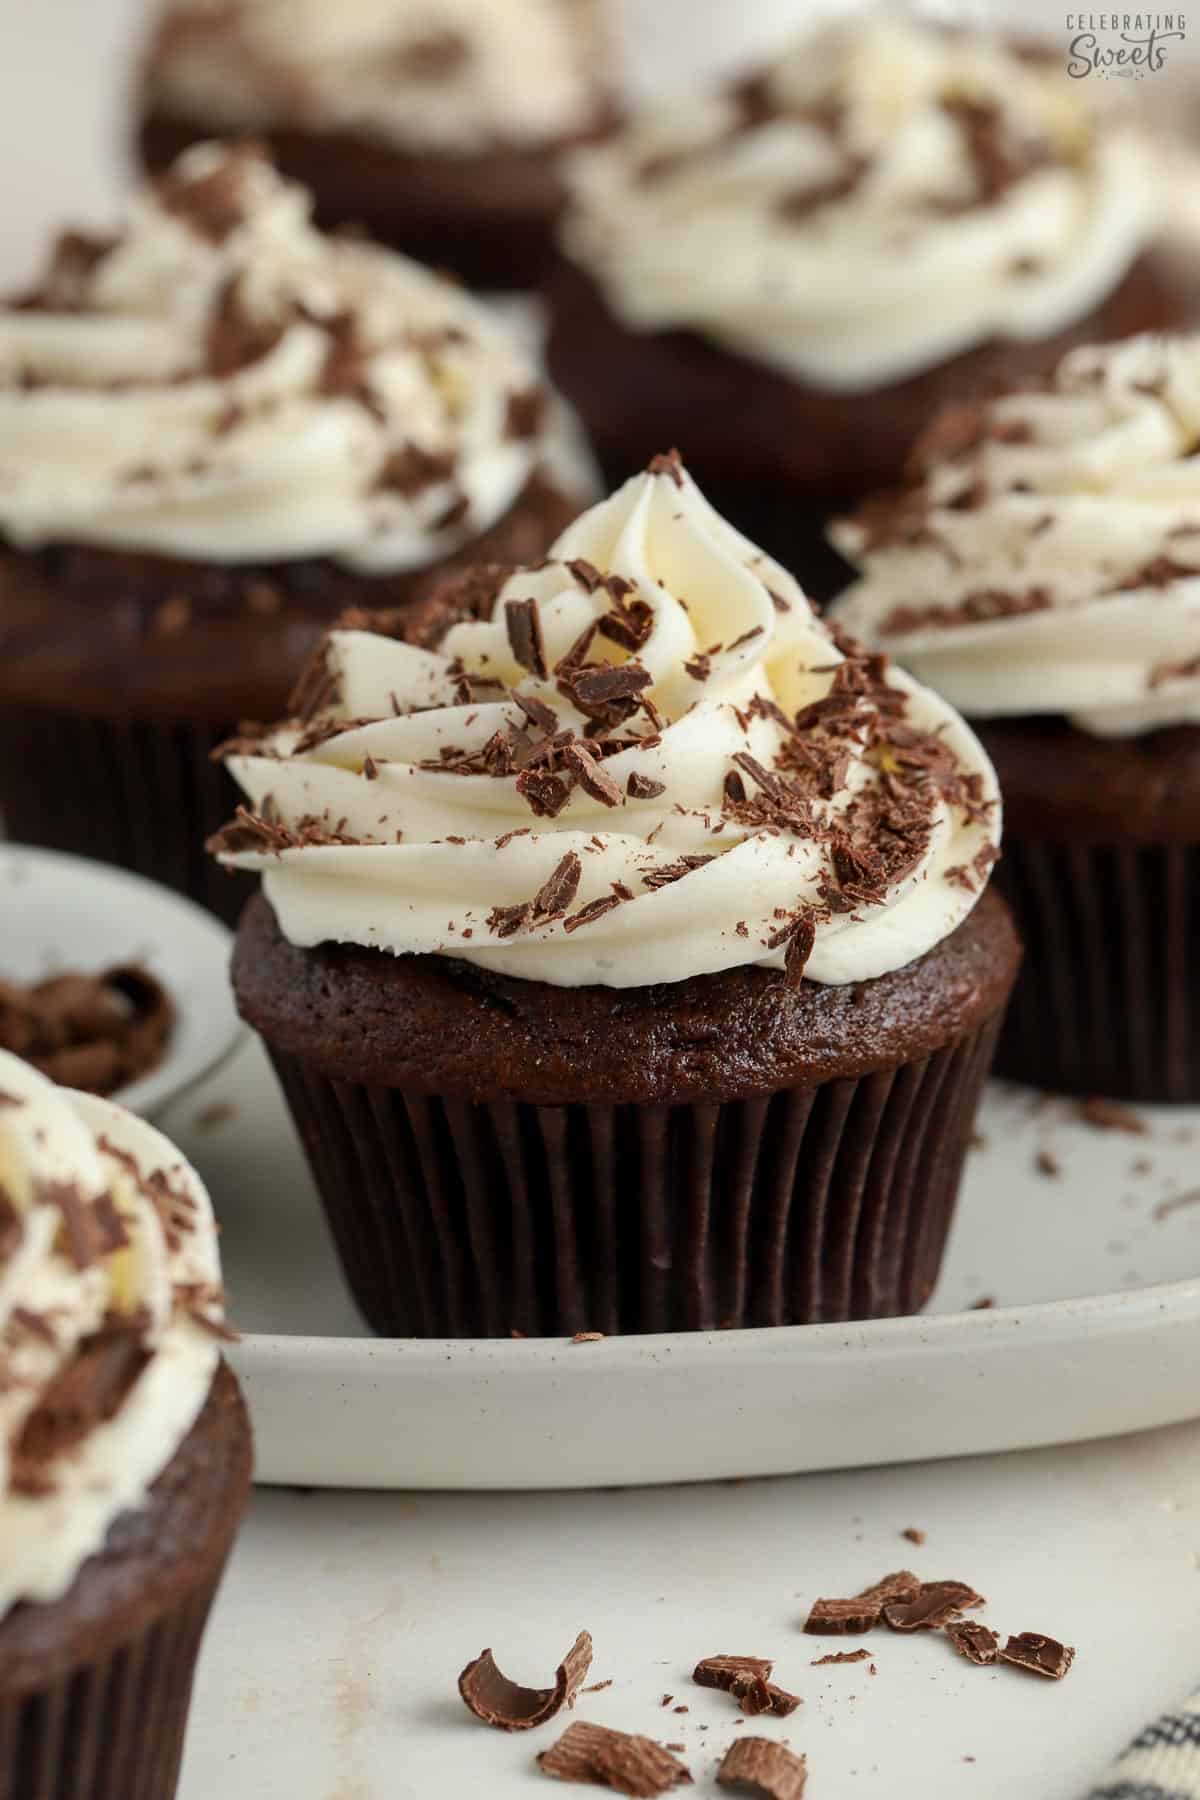 Chocolate cupcake topped with white frosting and chocolate shavings.